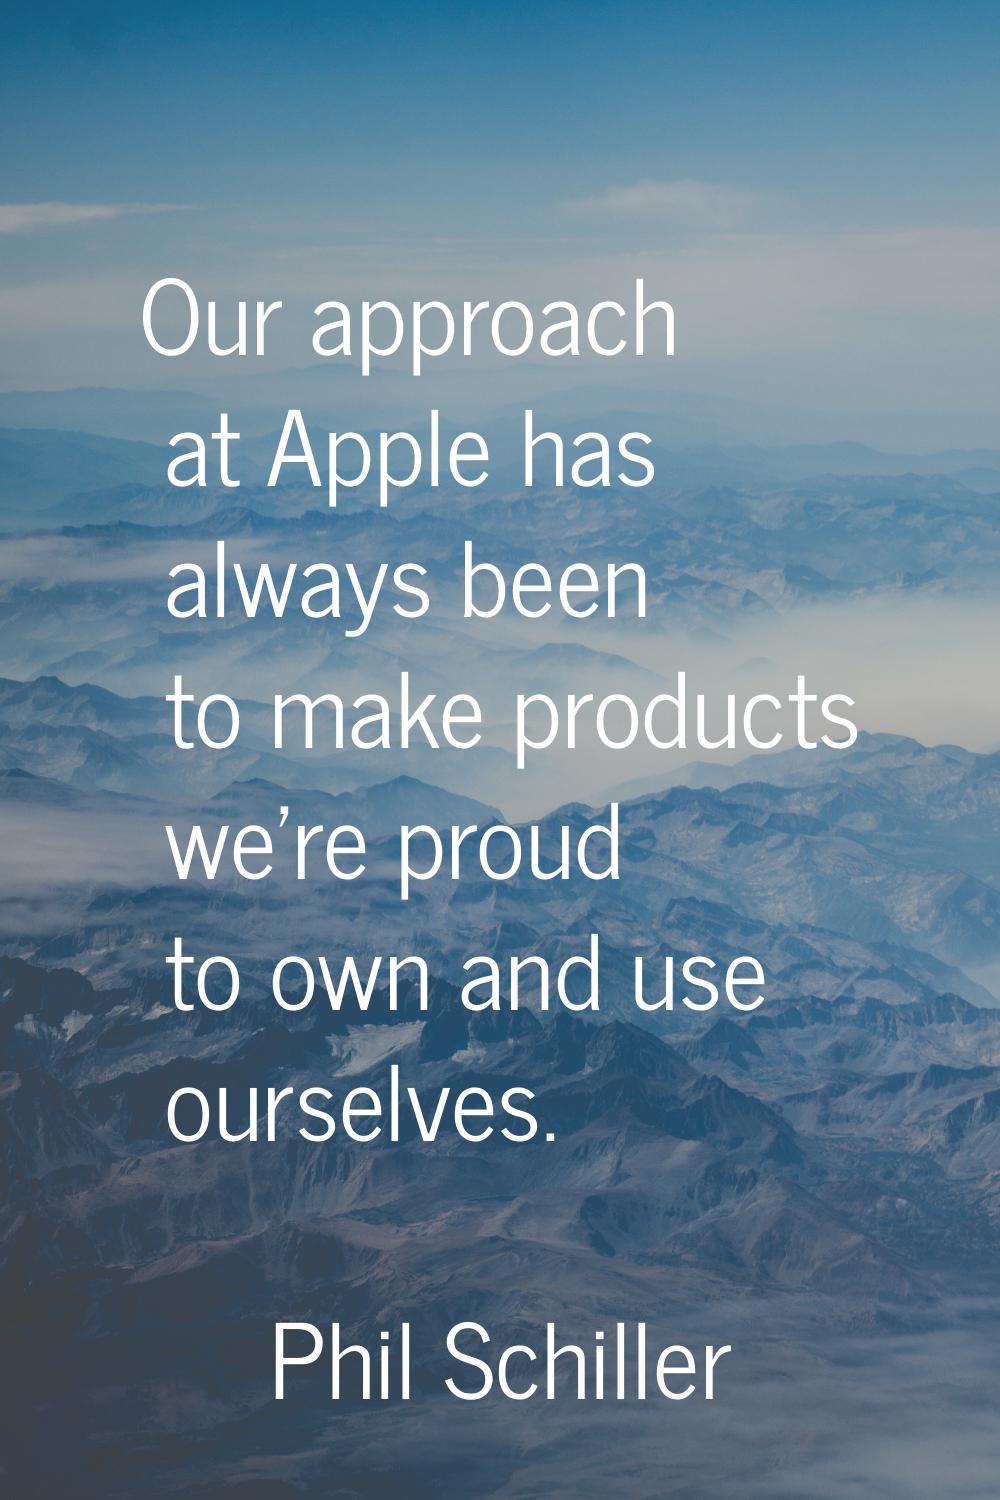 Our approach at Apple has always been to make products we're proud to own and use ourselves.